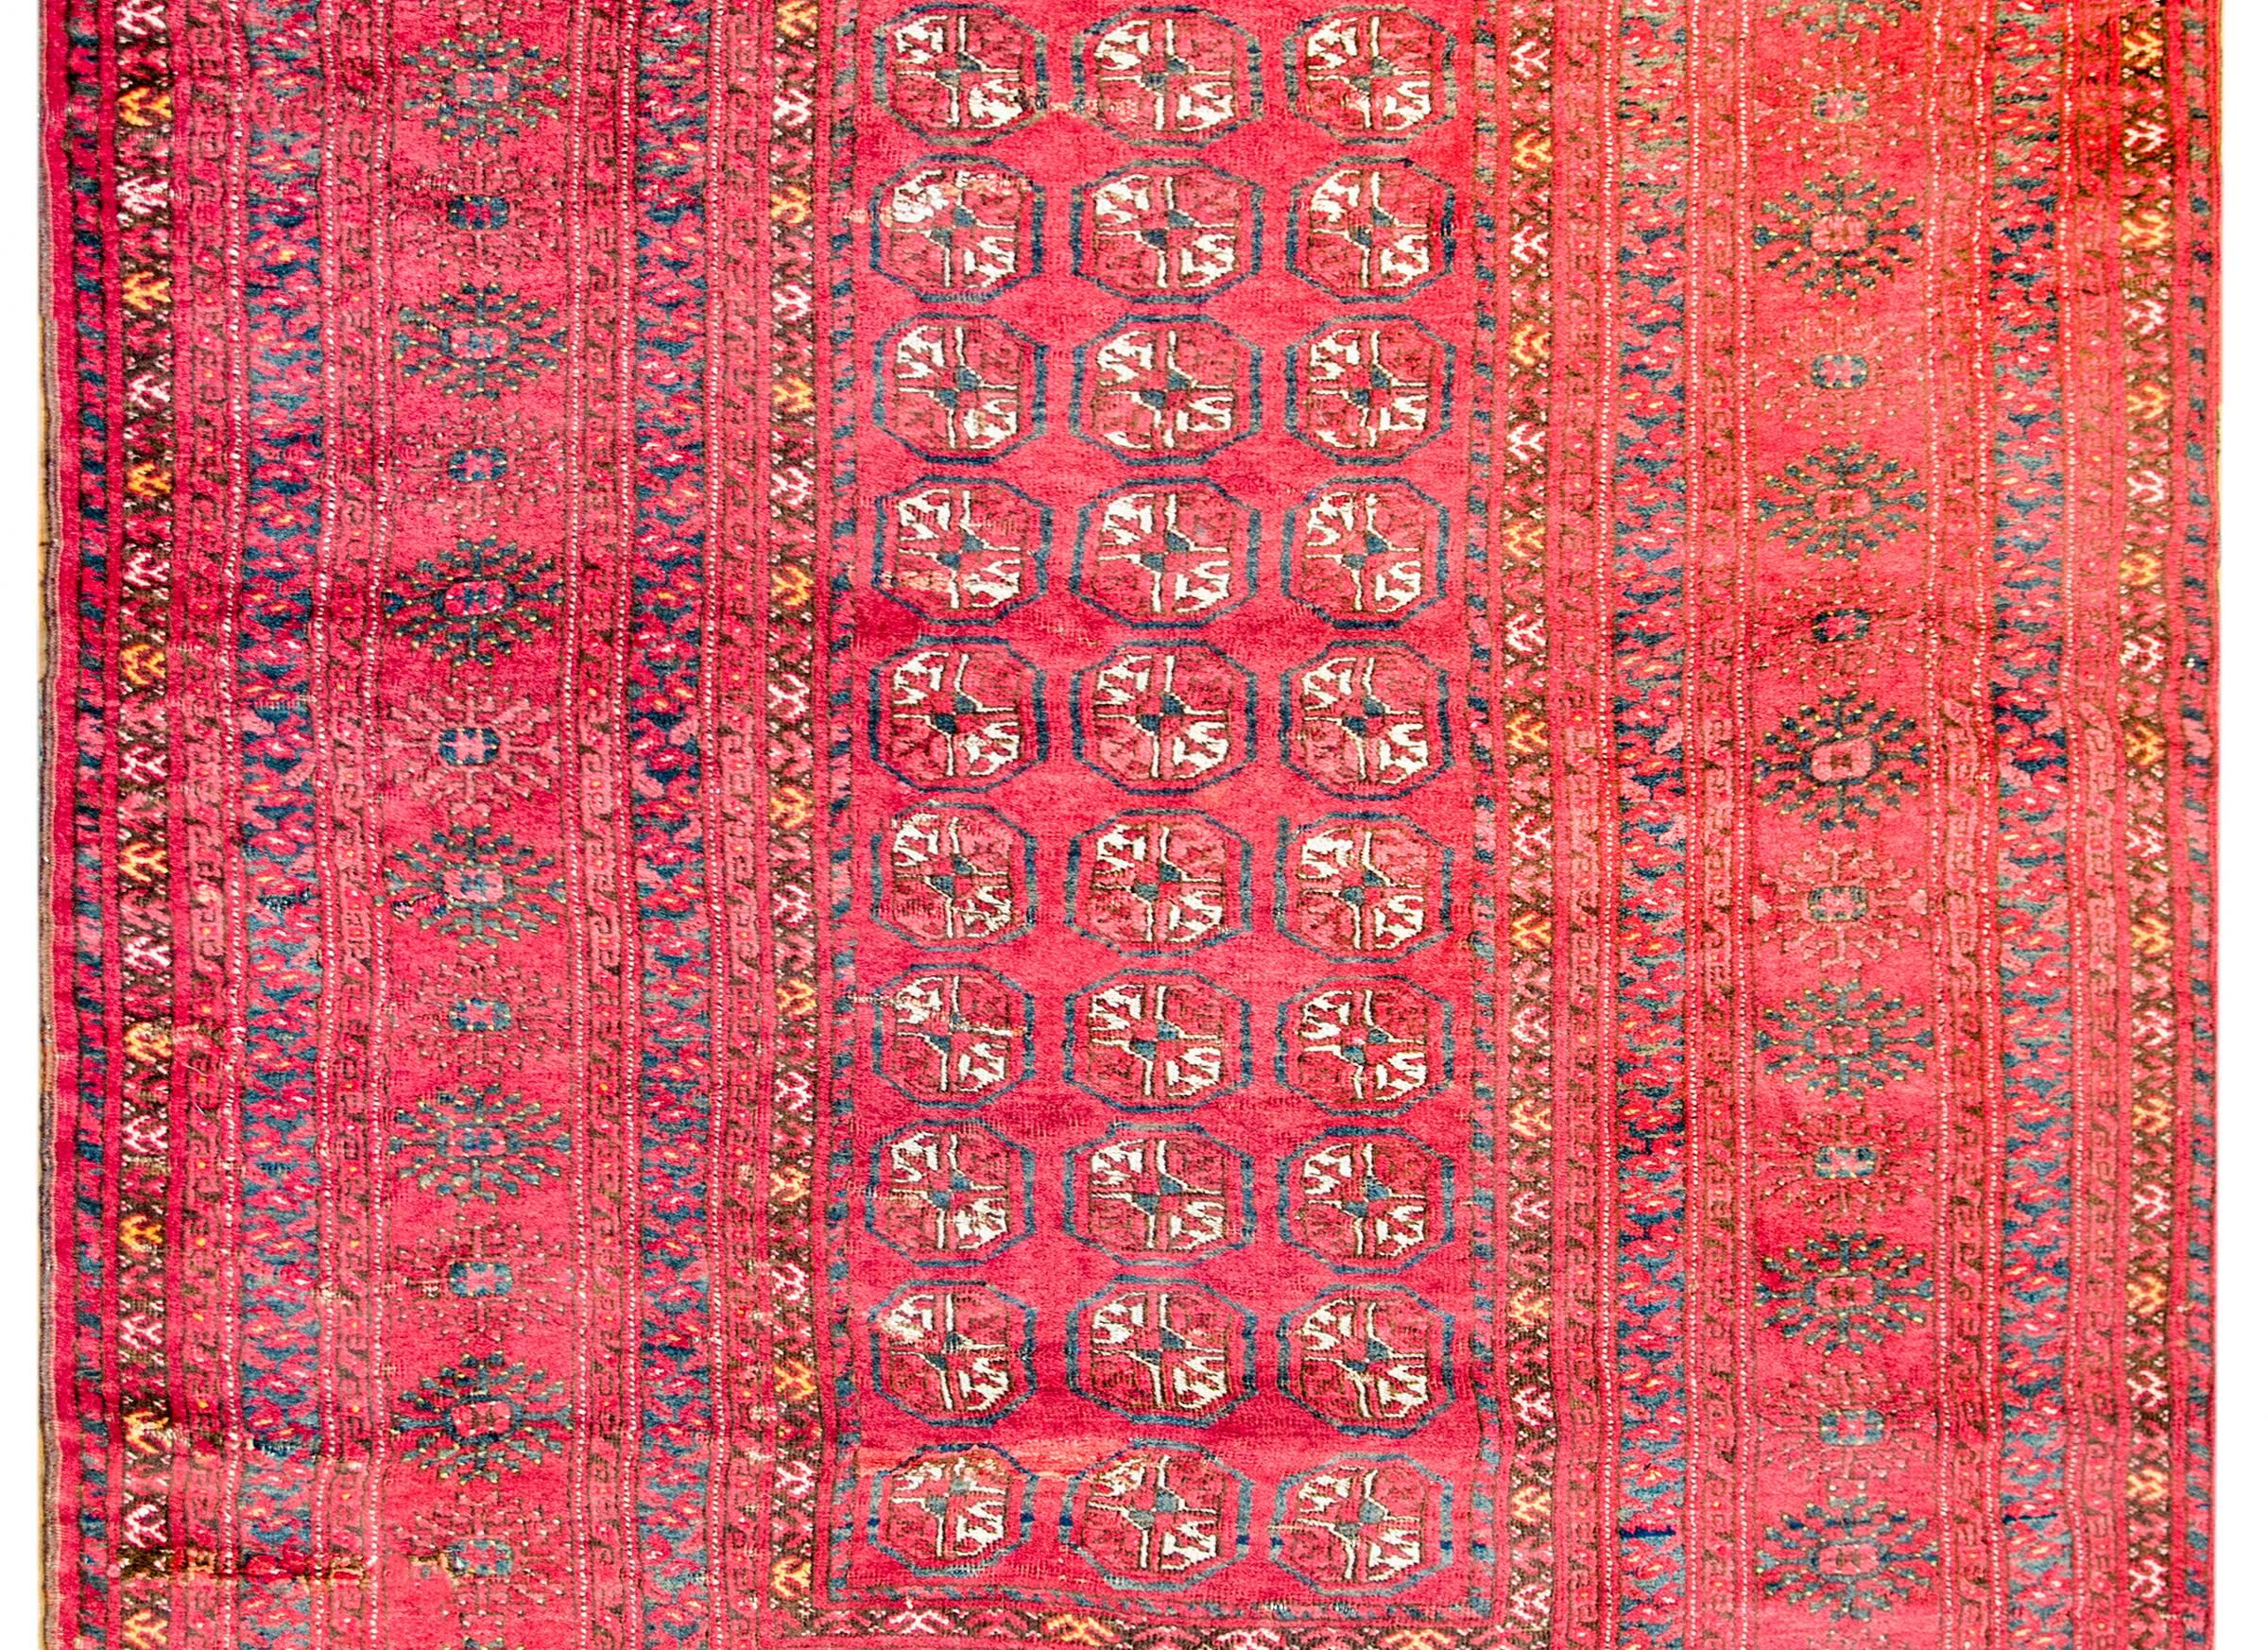 A gorgeous vintage Turkmen rug with an all-over pattern of small medallions woven in orange, white, and indigo vegetable dyed silk on a brilliant crimson background. The border is exceptionally wide with a large central stylized floral stripe